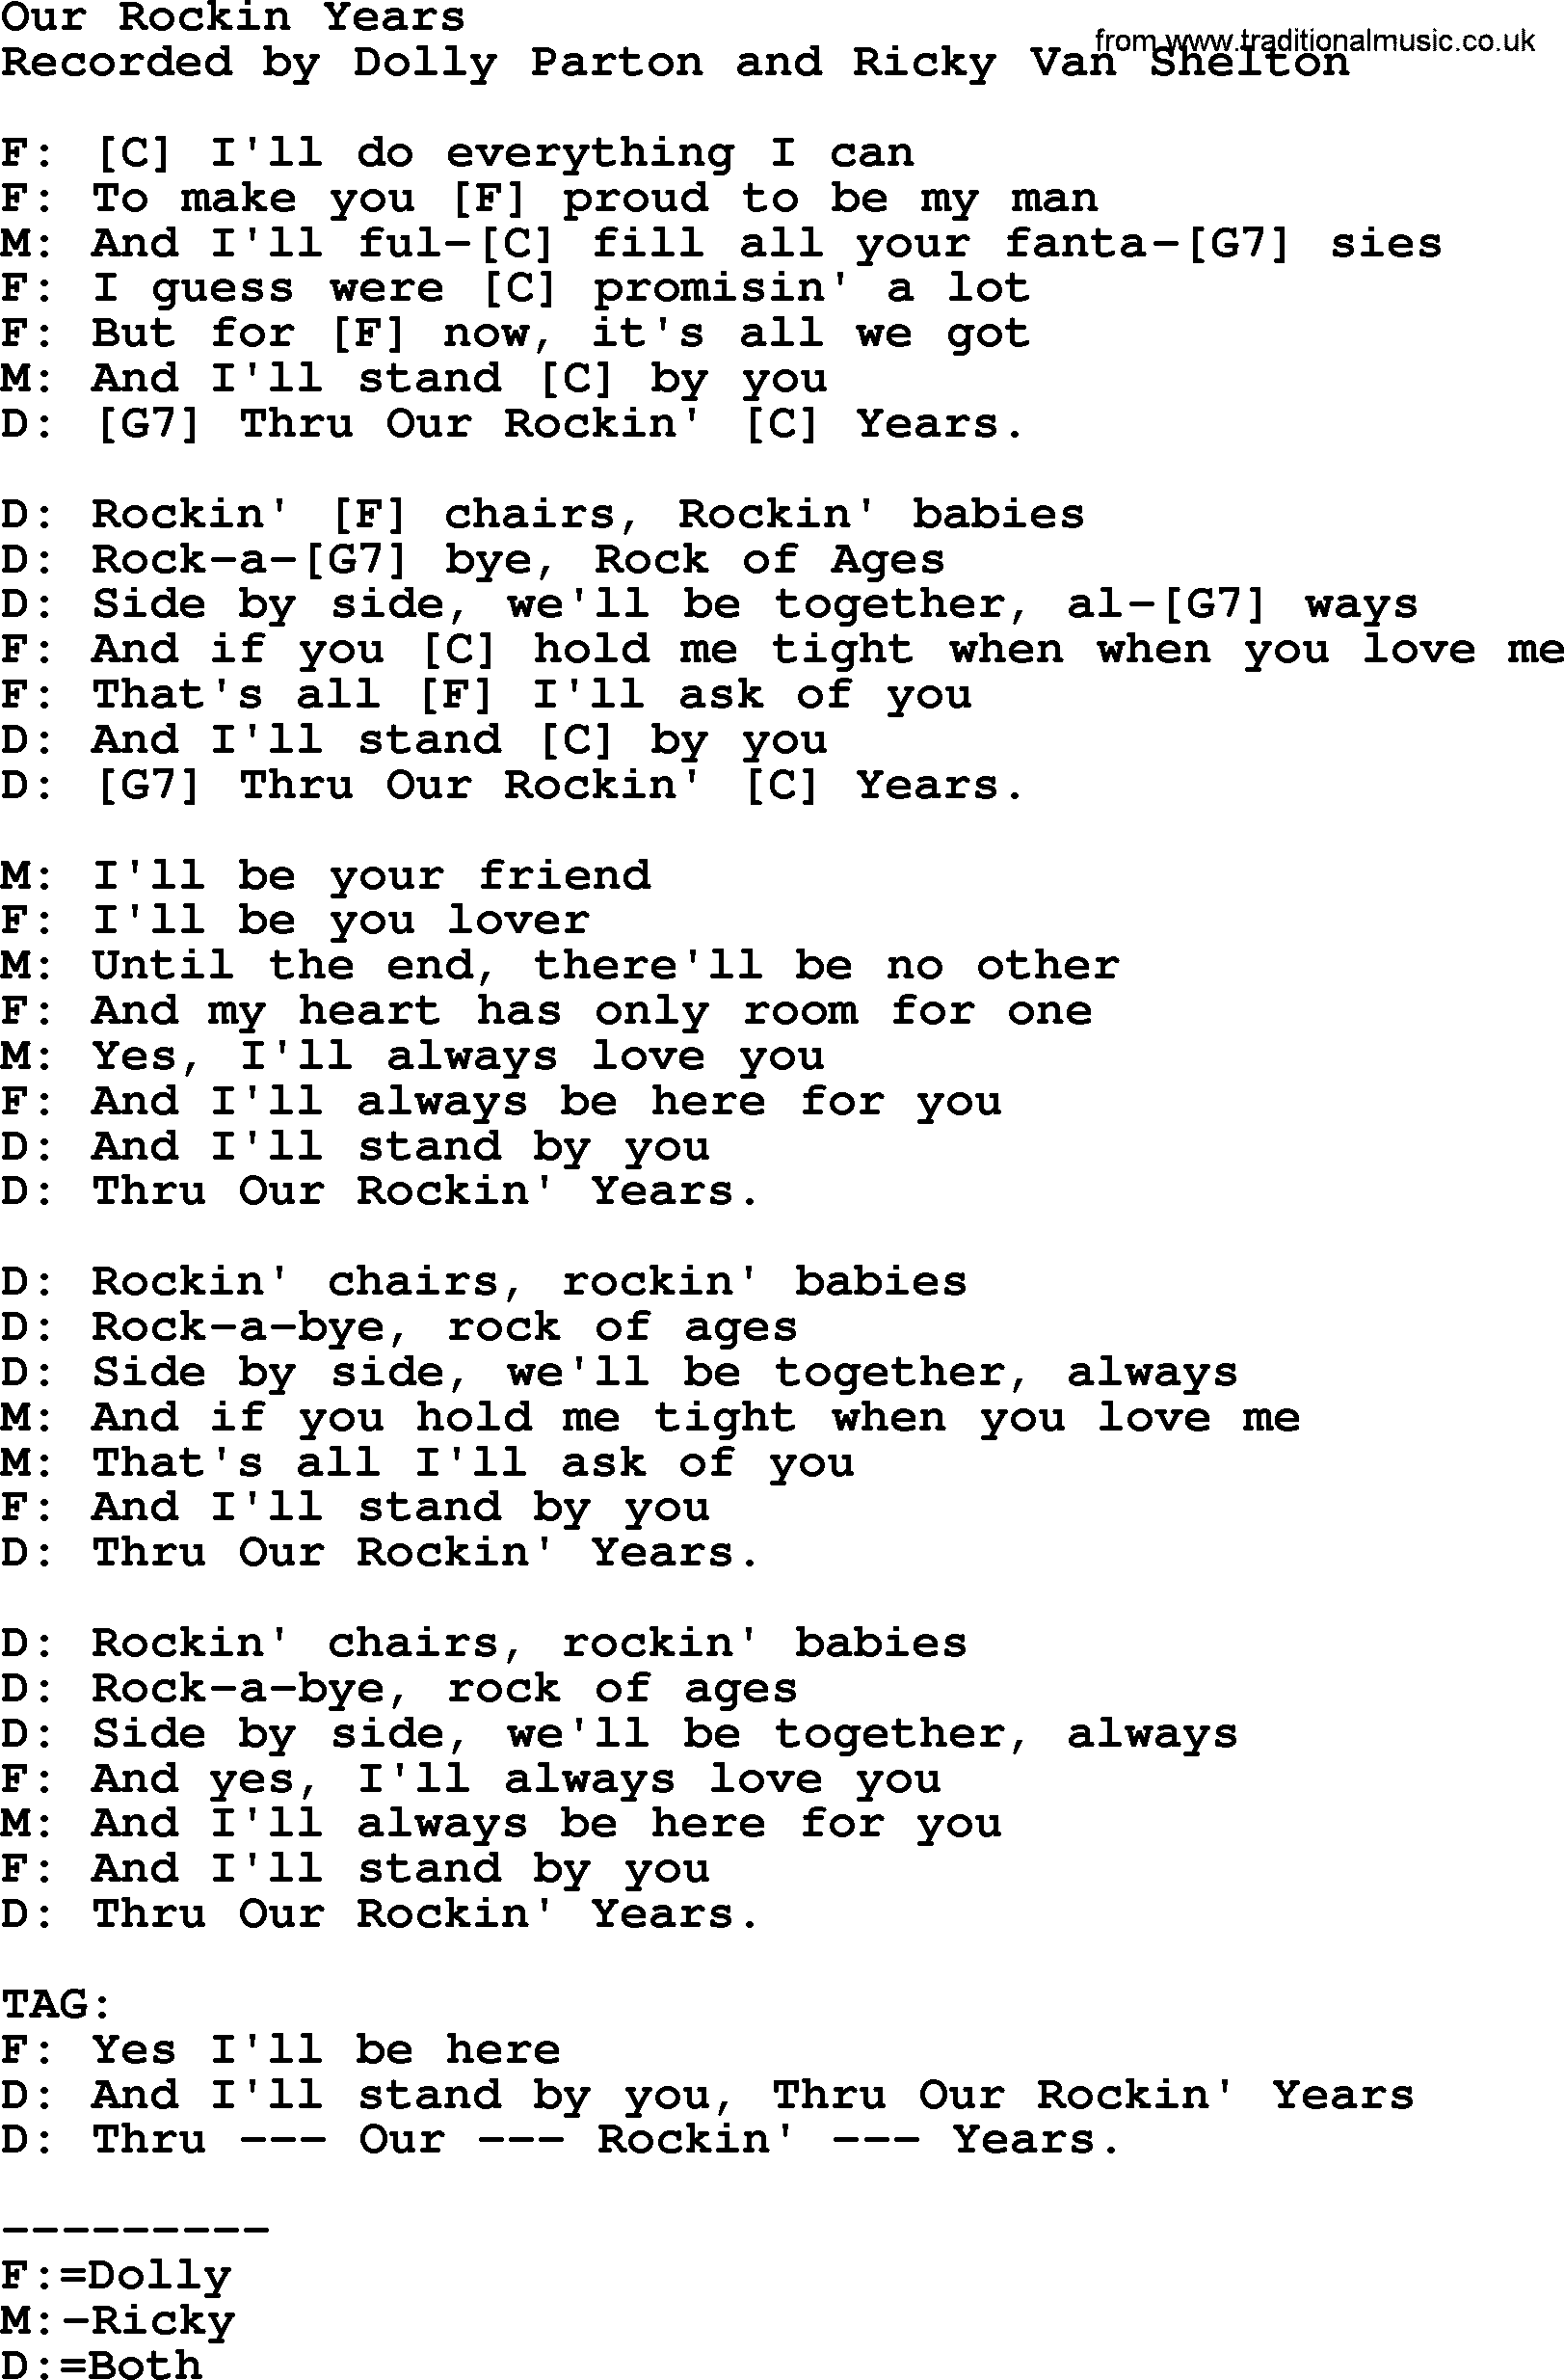 Dolly Parton song Our Rockin Years, lyrics and chords